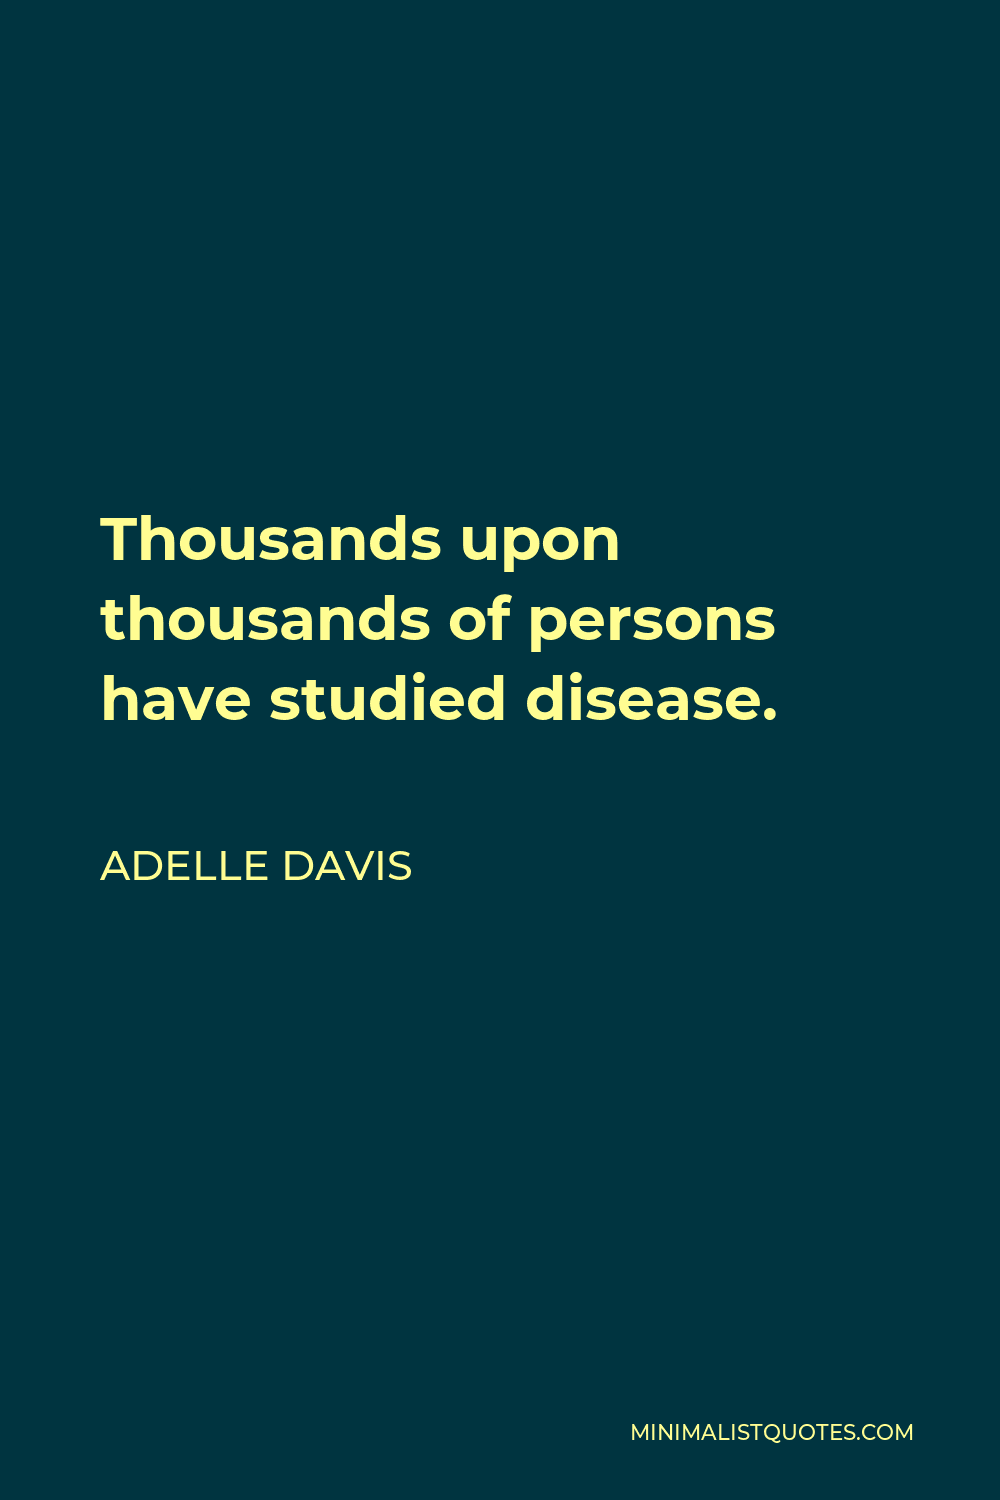 Adelle Davis Quote - Thousands upon thousands of persons have studied disease.